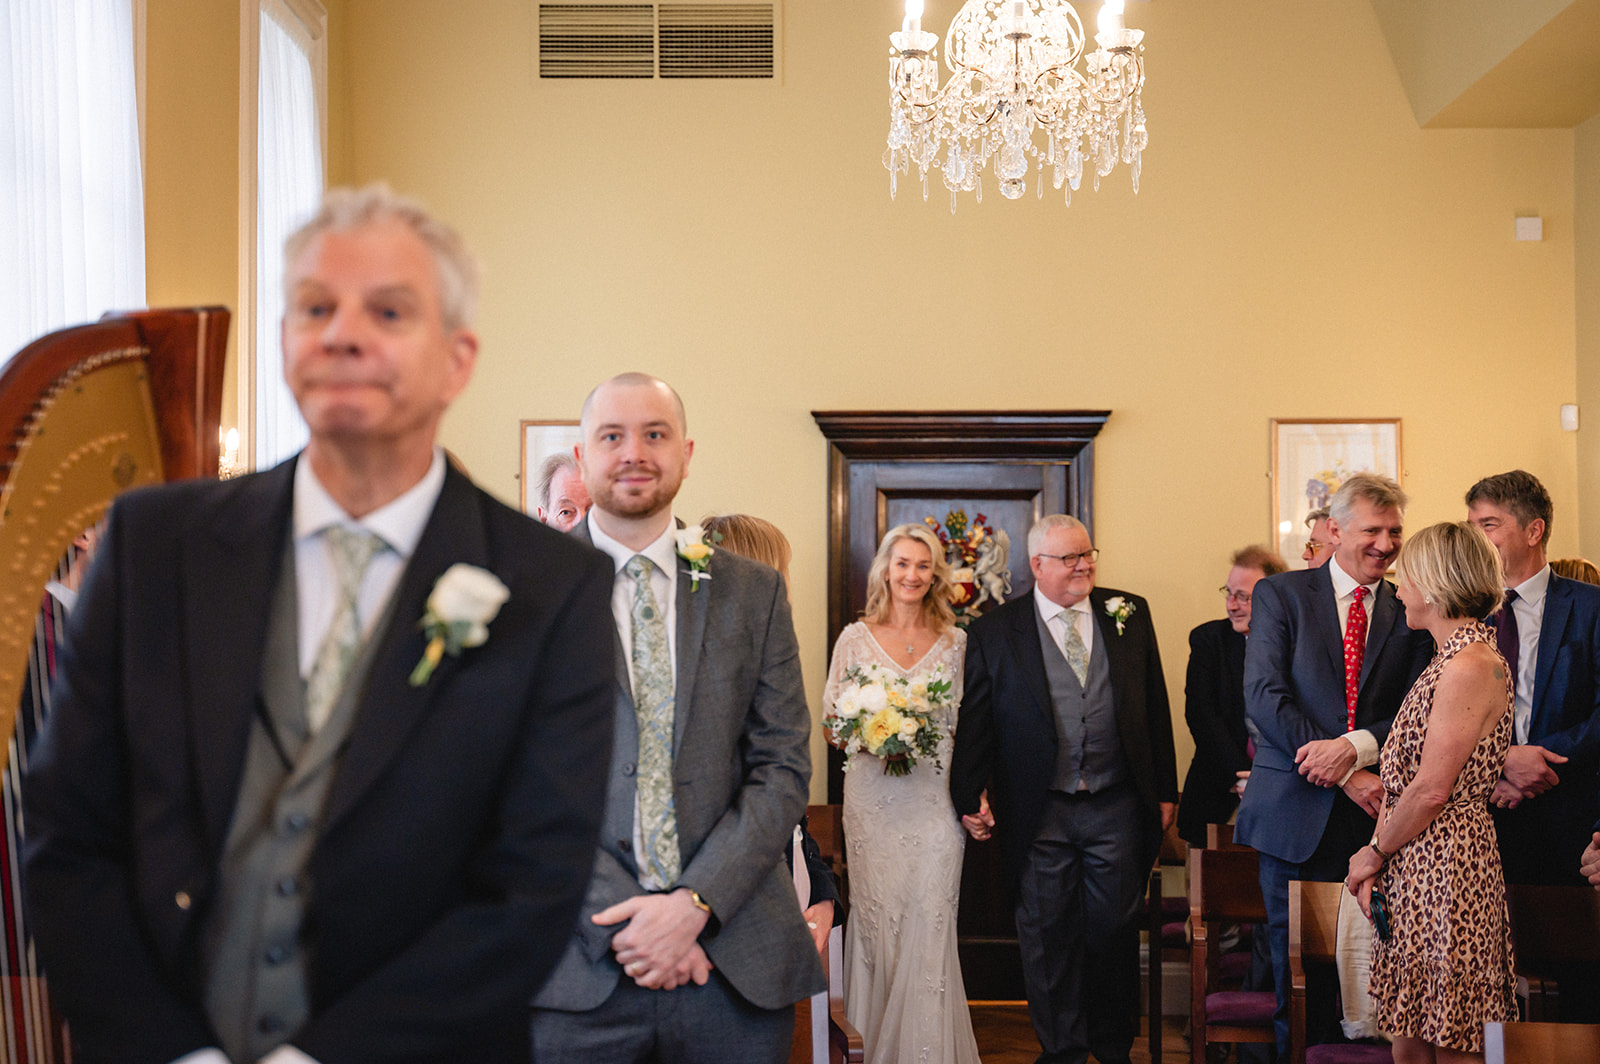 Lindsay and David's wedding ceremony in the Brydon Room at Chelsea Town Hall